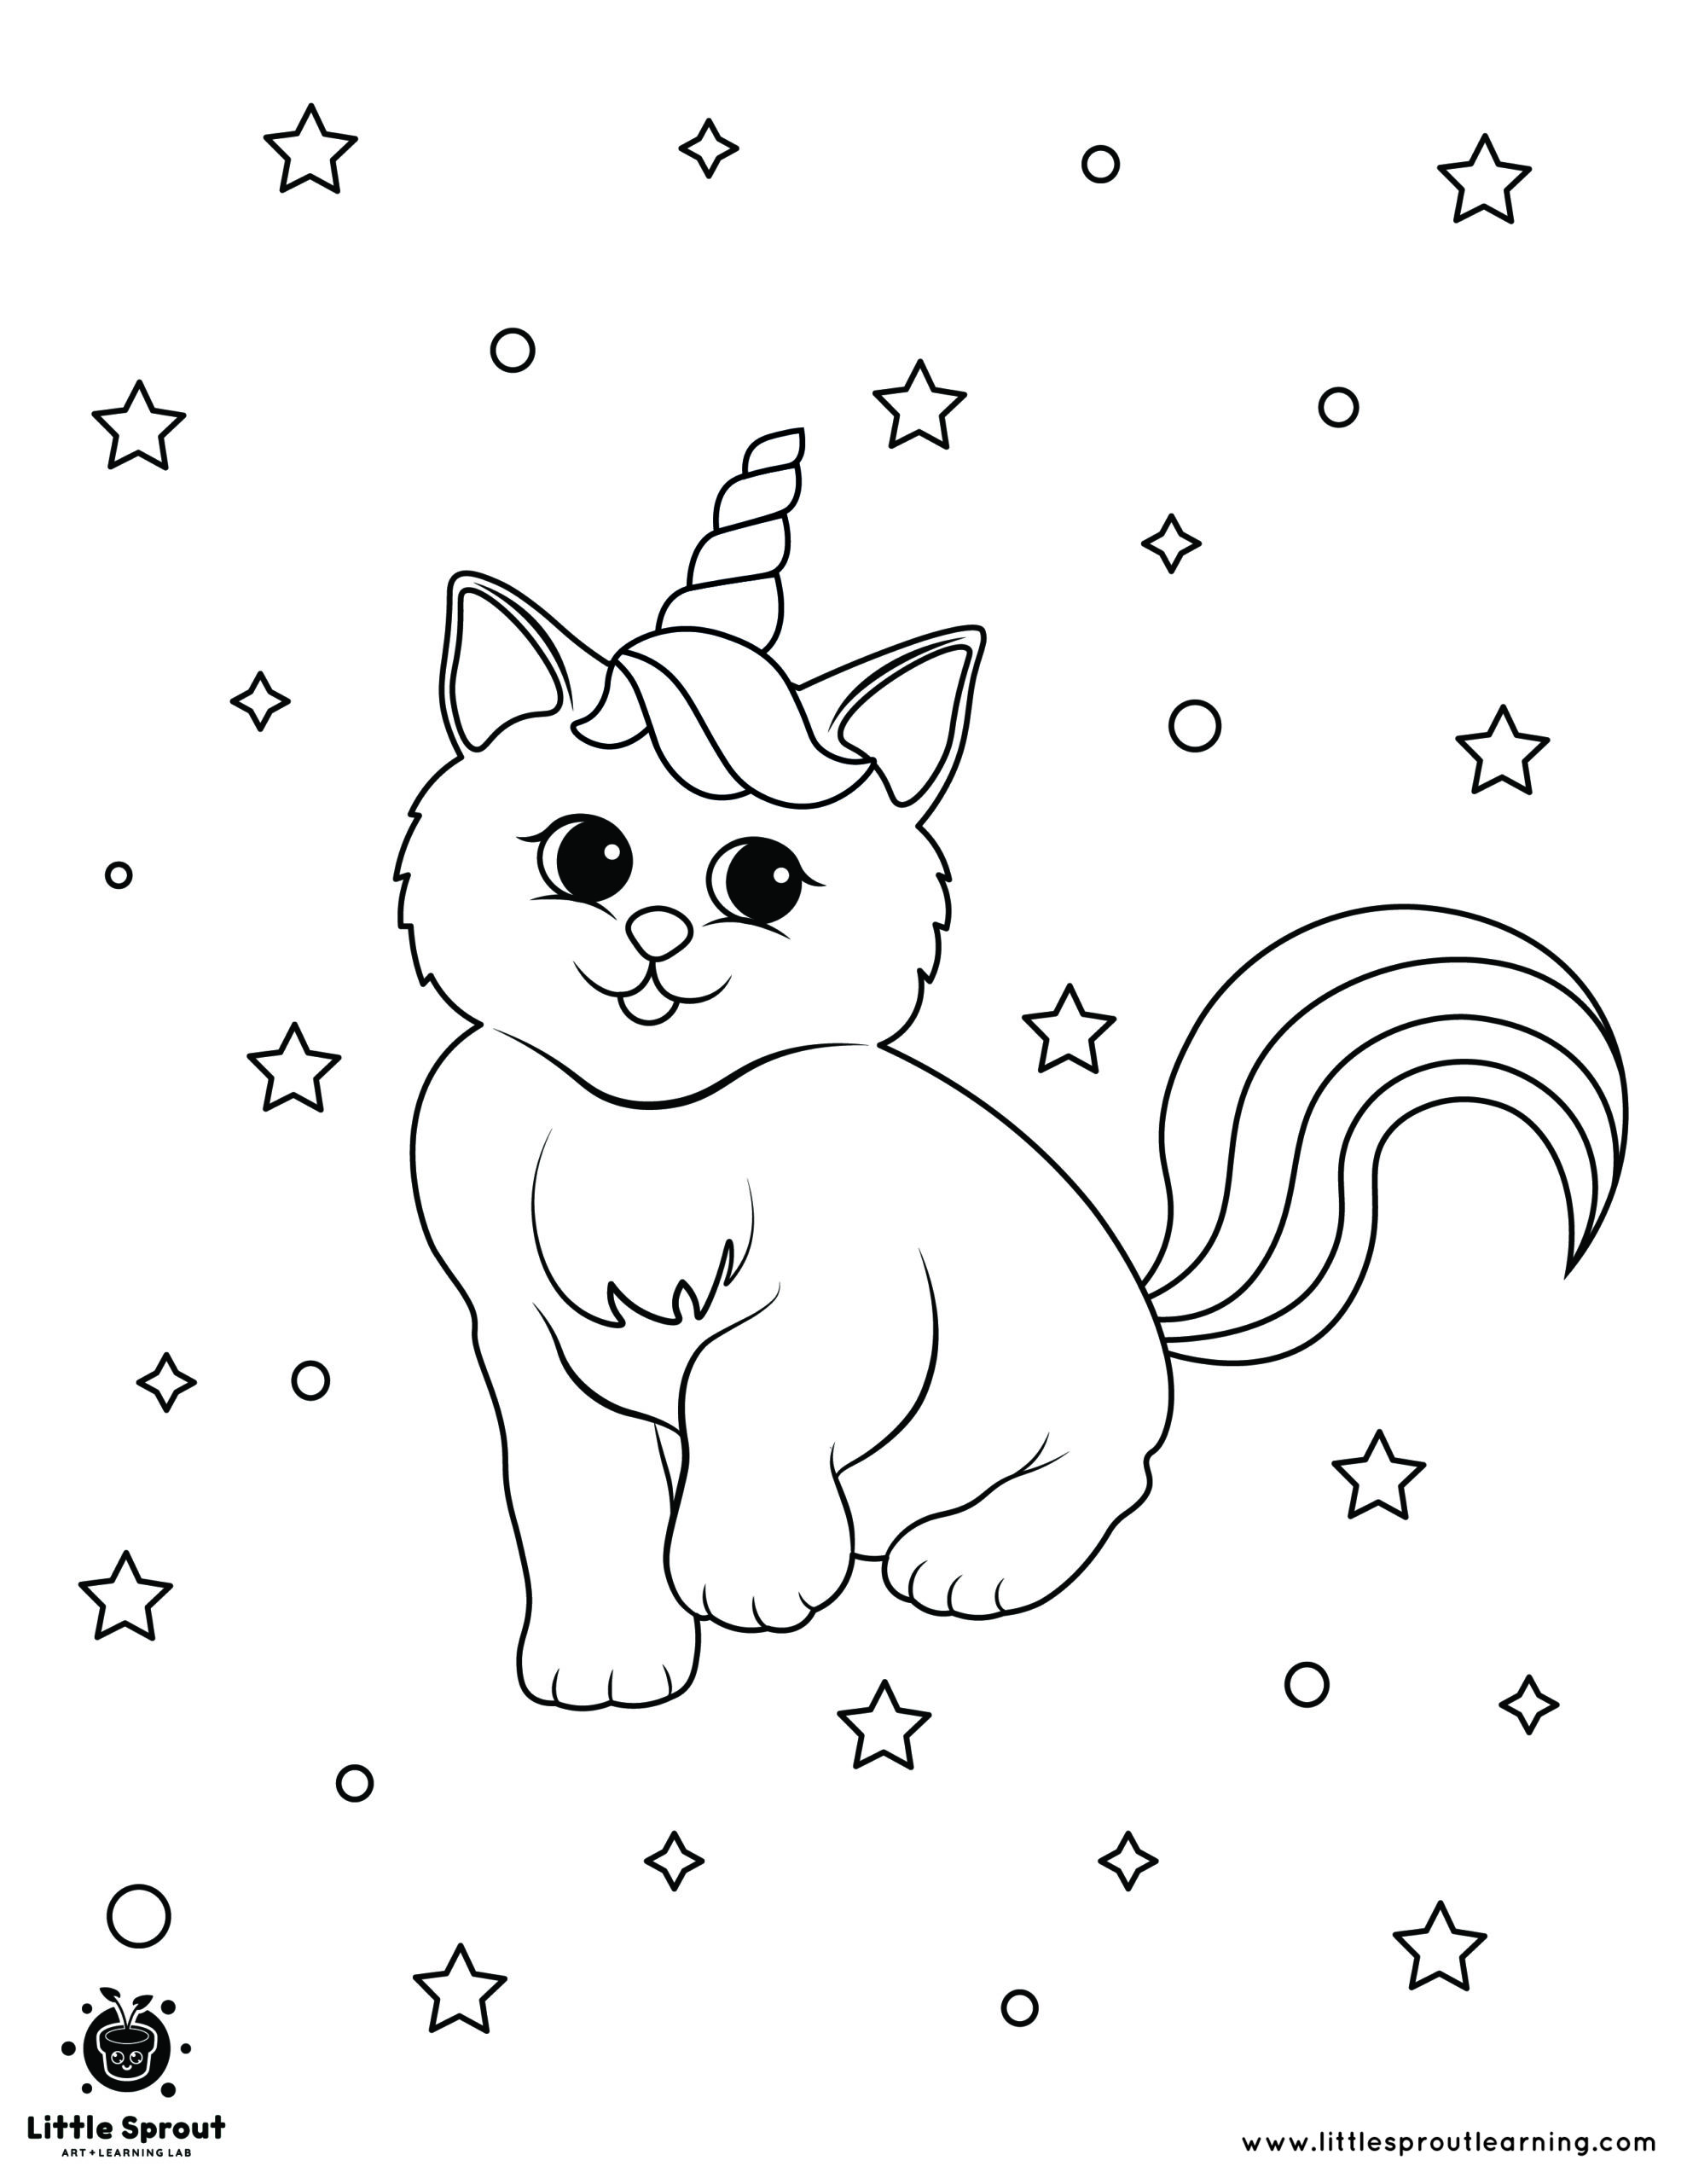 Unicorn cat coloring page